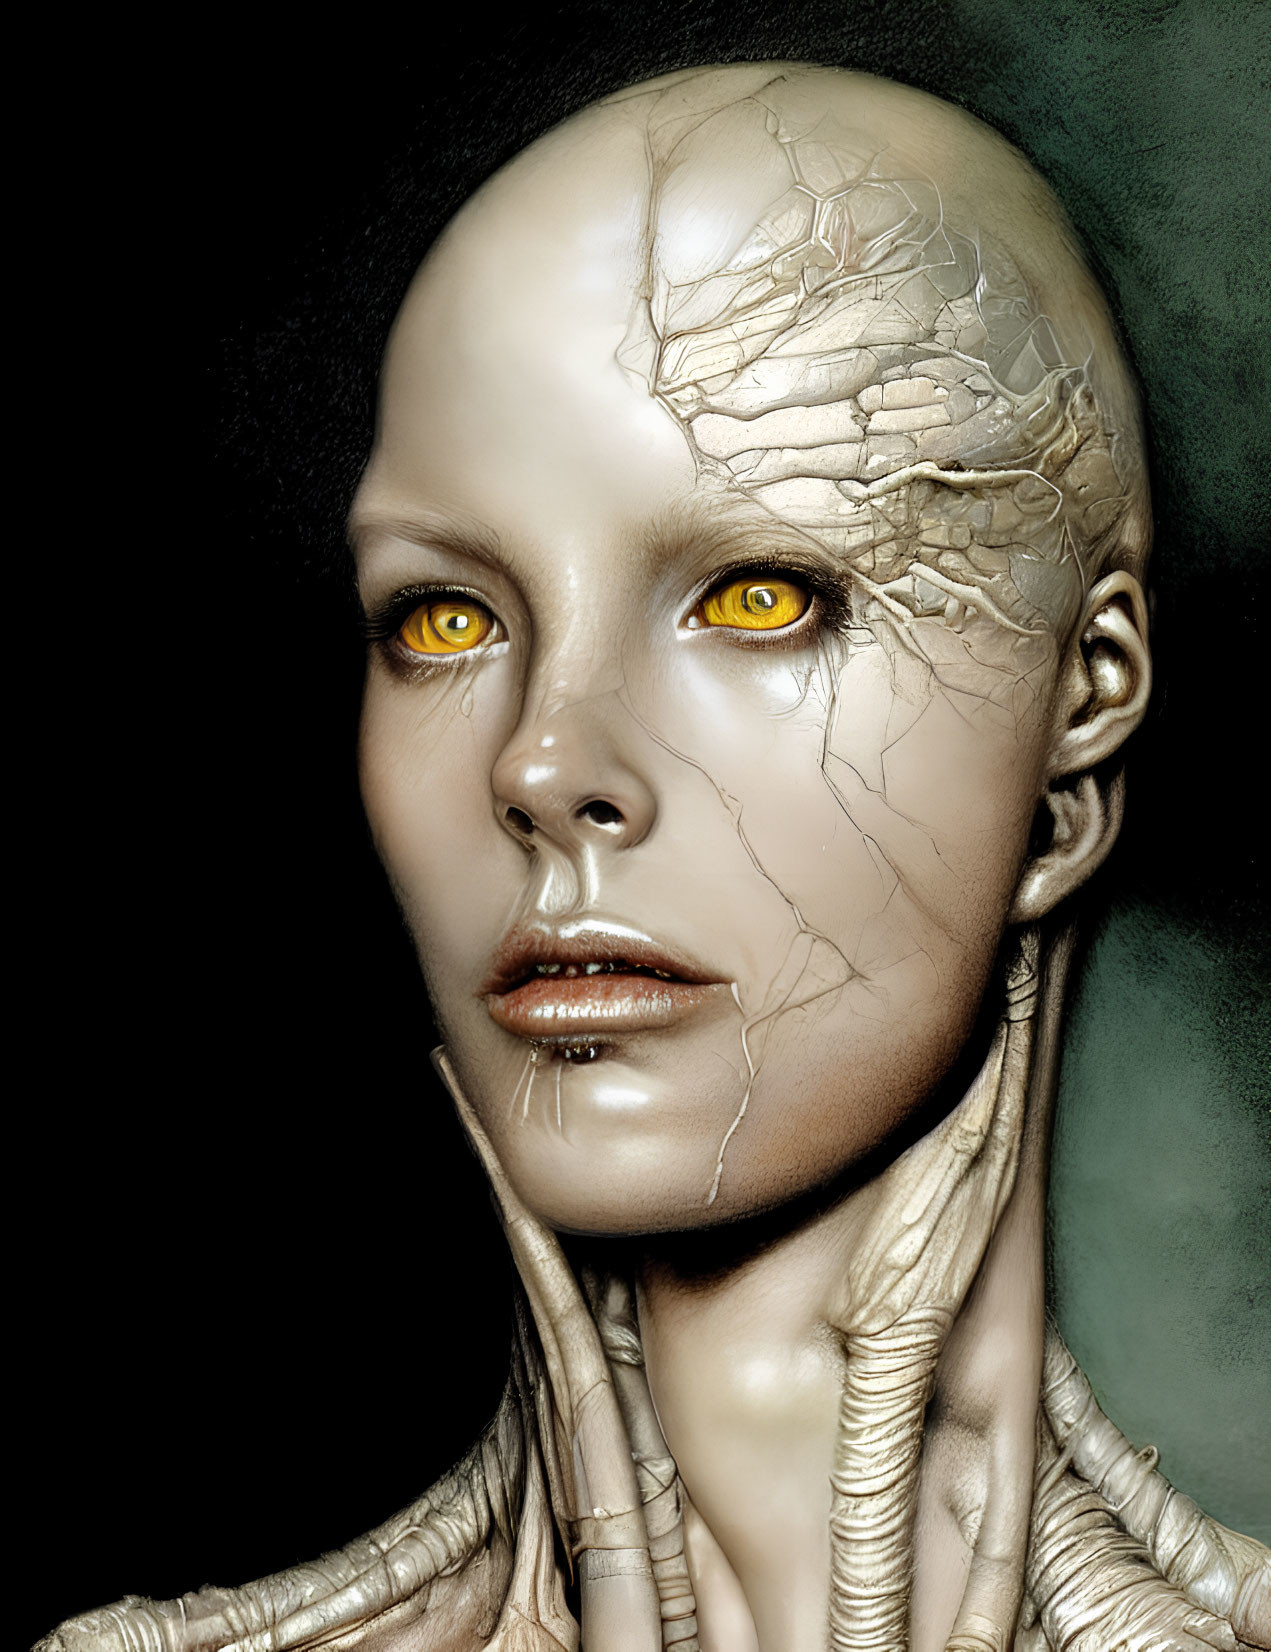 Metallic-faced humanoid with yellow eyes and cable-like neck.